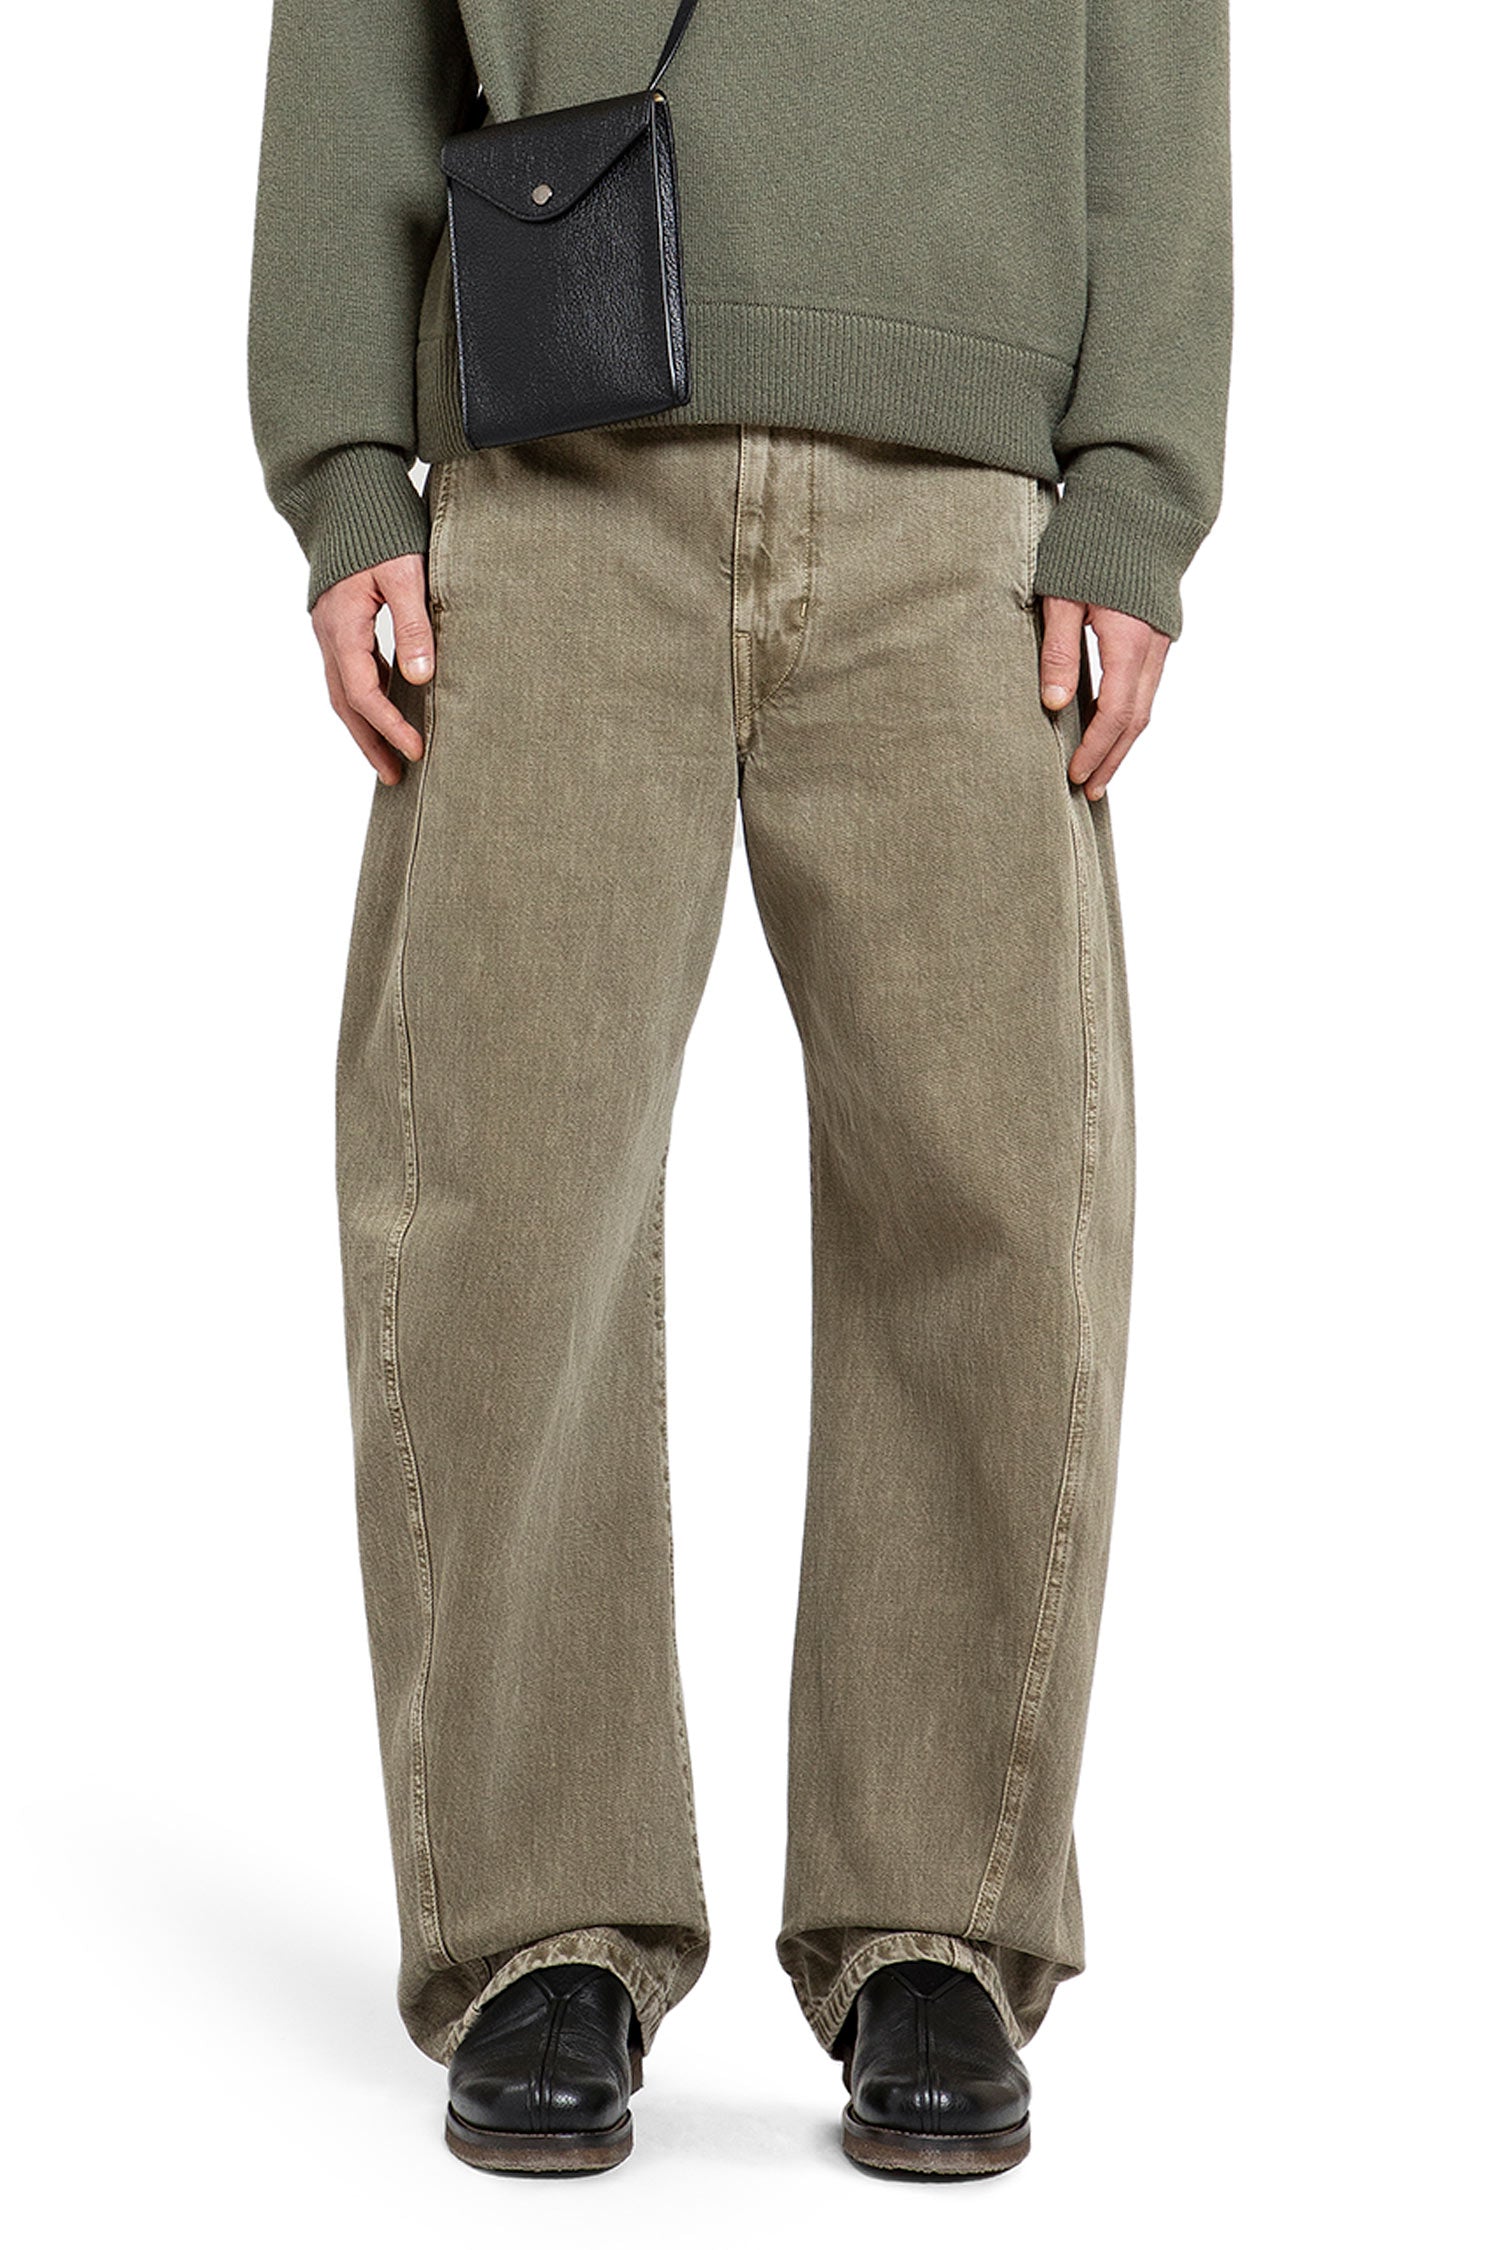 LEMAIRE MAN GREEN TROUSERS